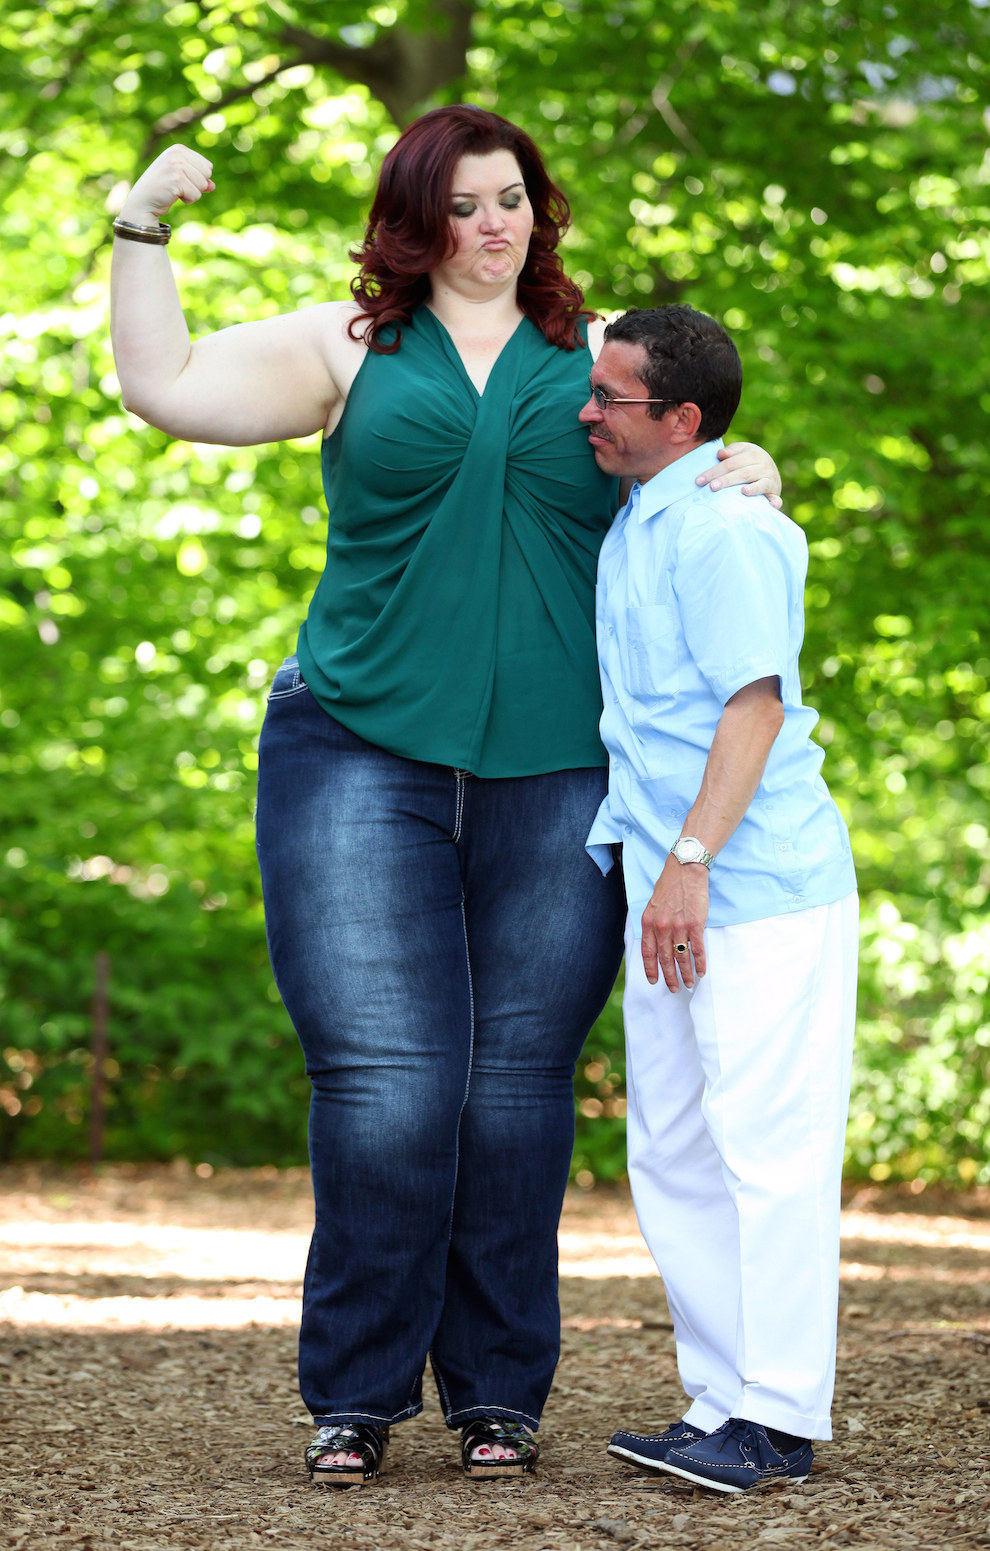 This Woman Is 6 Foot 3 Inches Tall, Weighs 20 Stone, And Gets Paid By Guys  To Squash Them